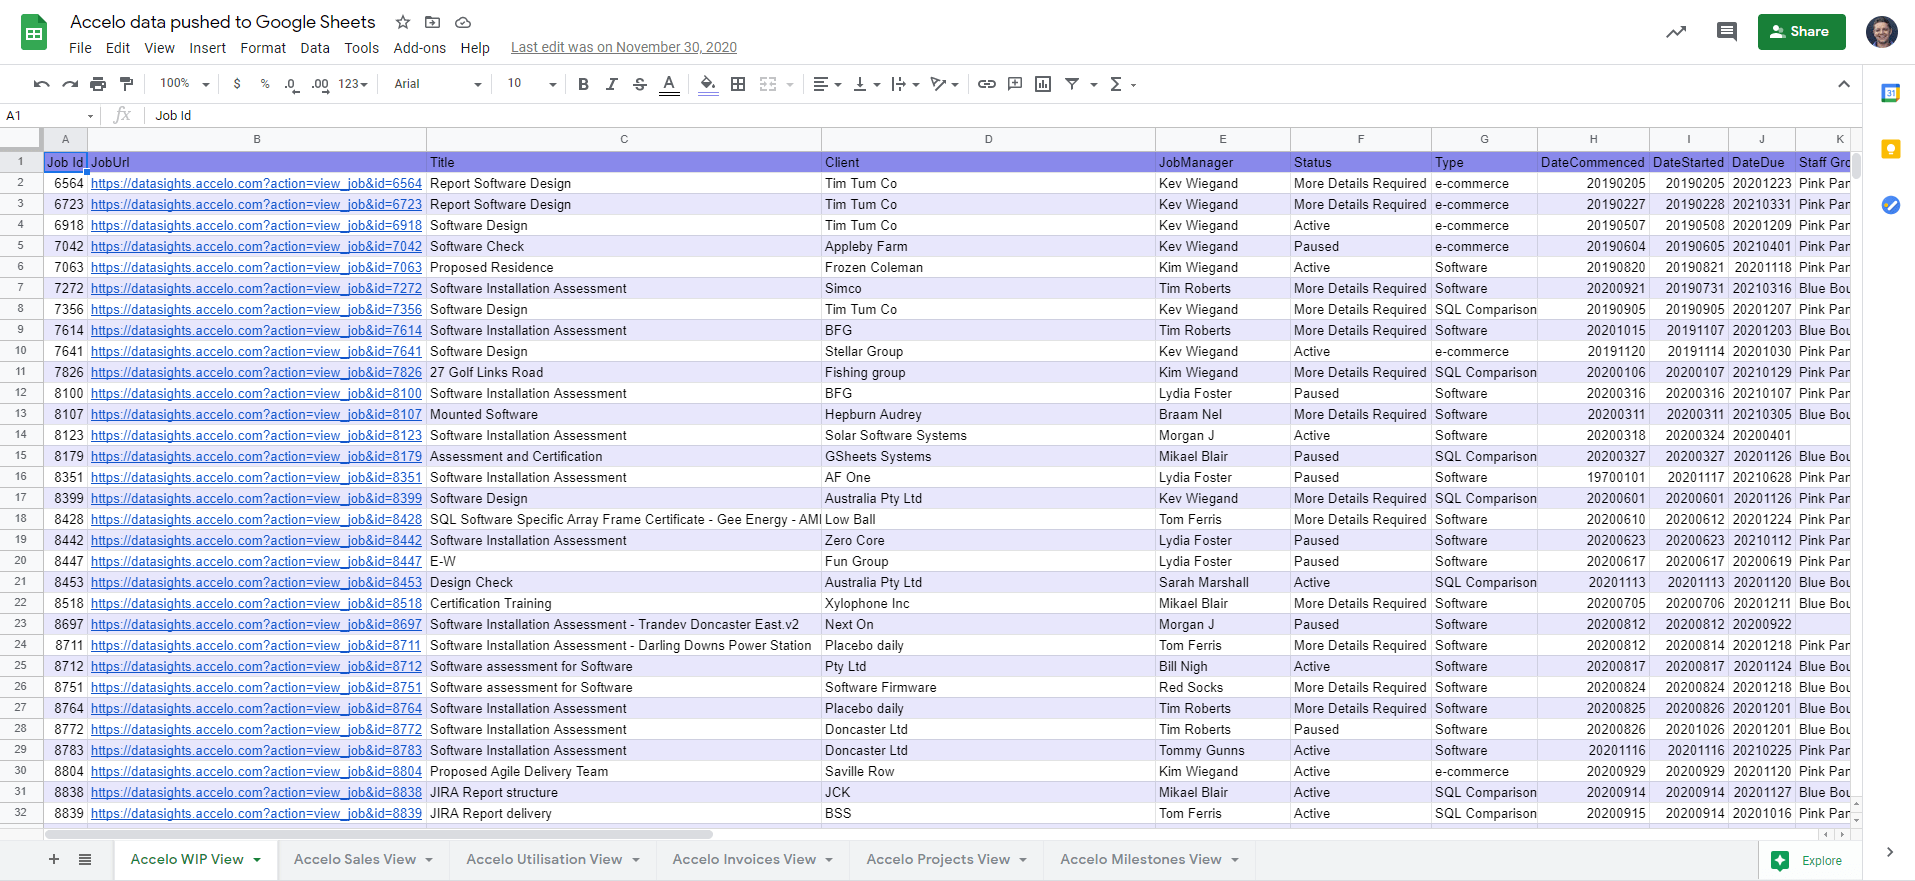 Accelo Data Pushed to Google Sheets